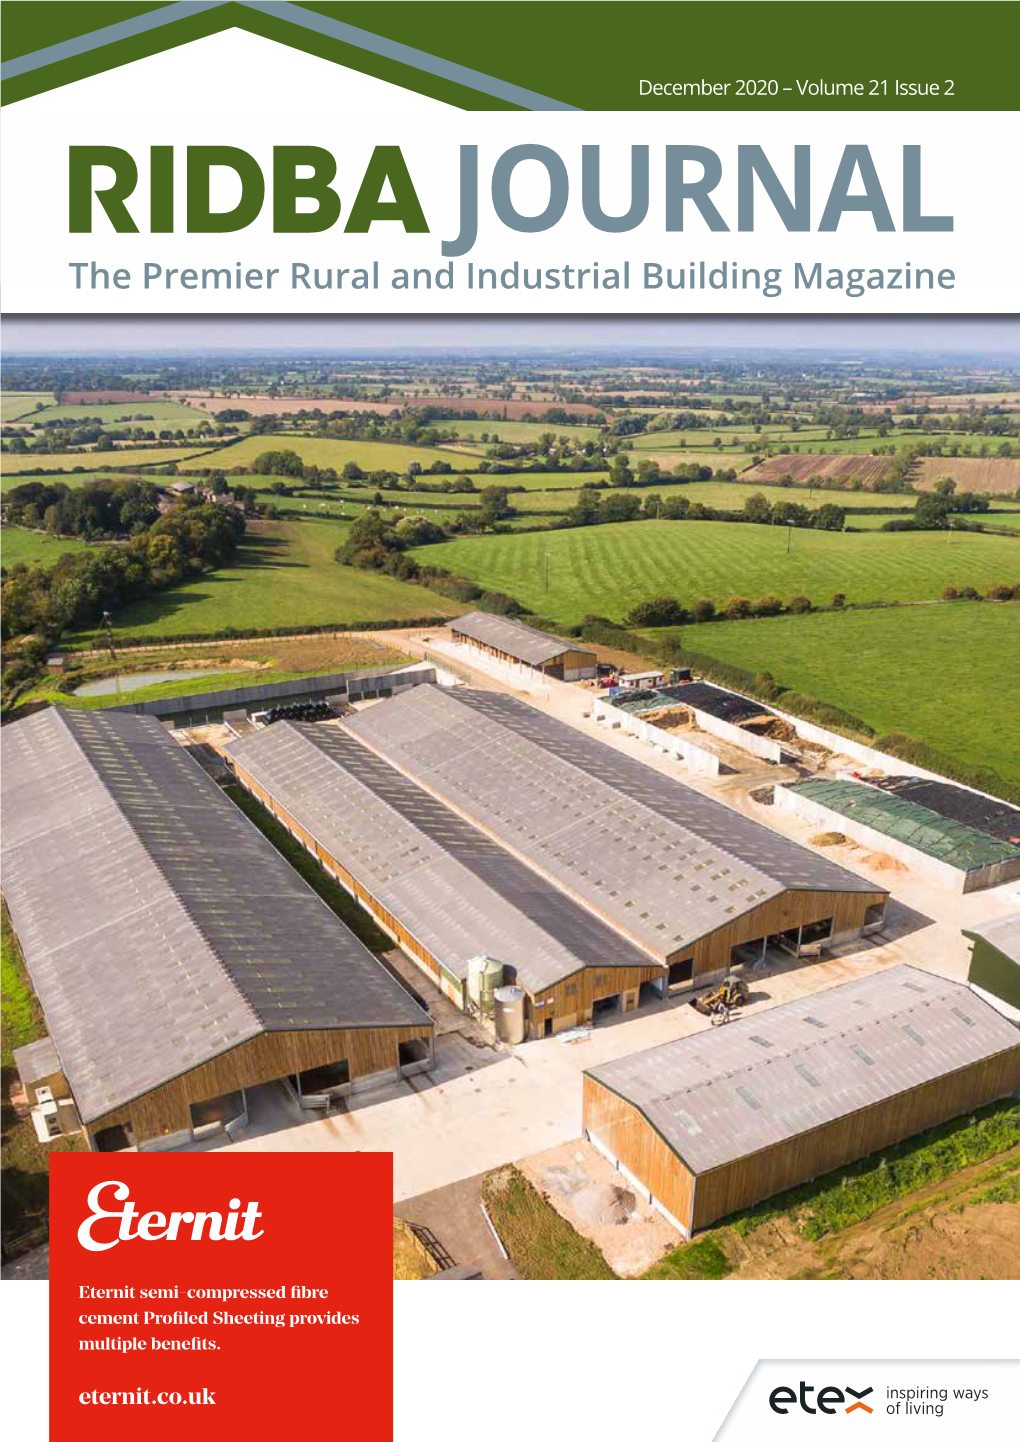 The Premier Rural and Industrial Building Magazine